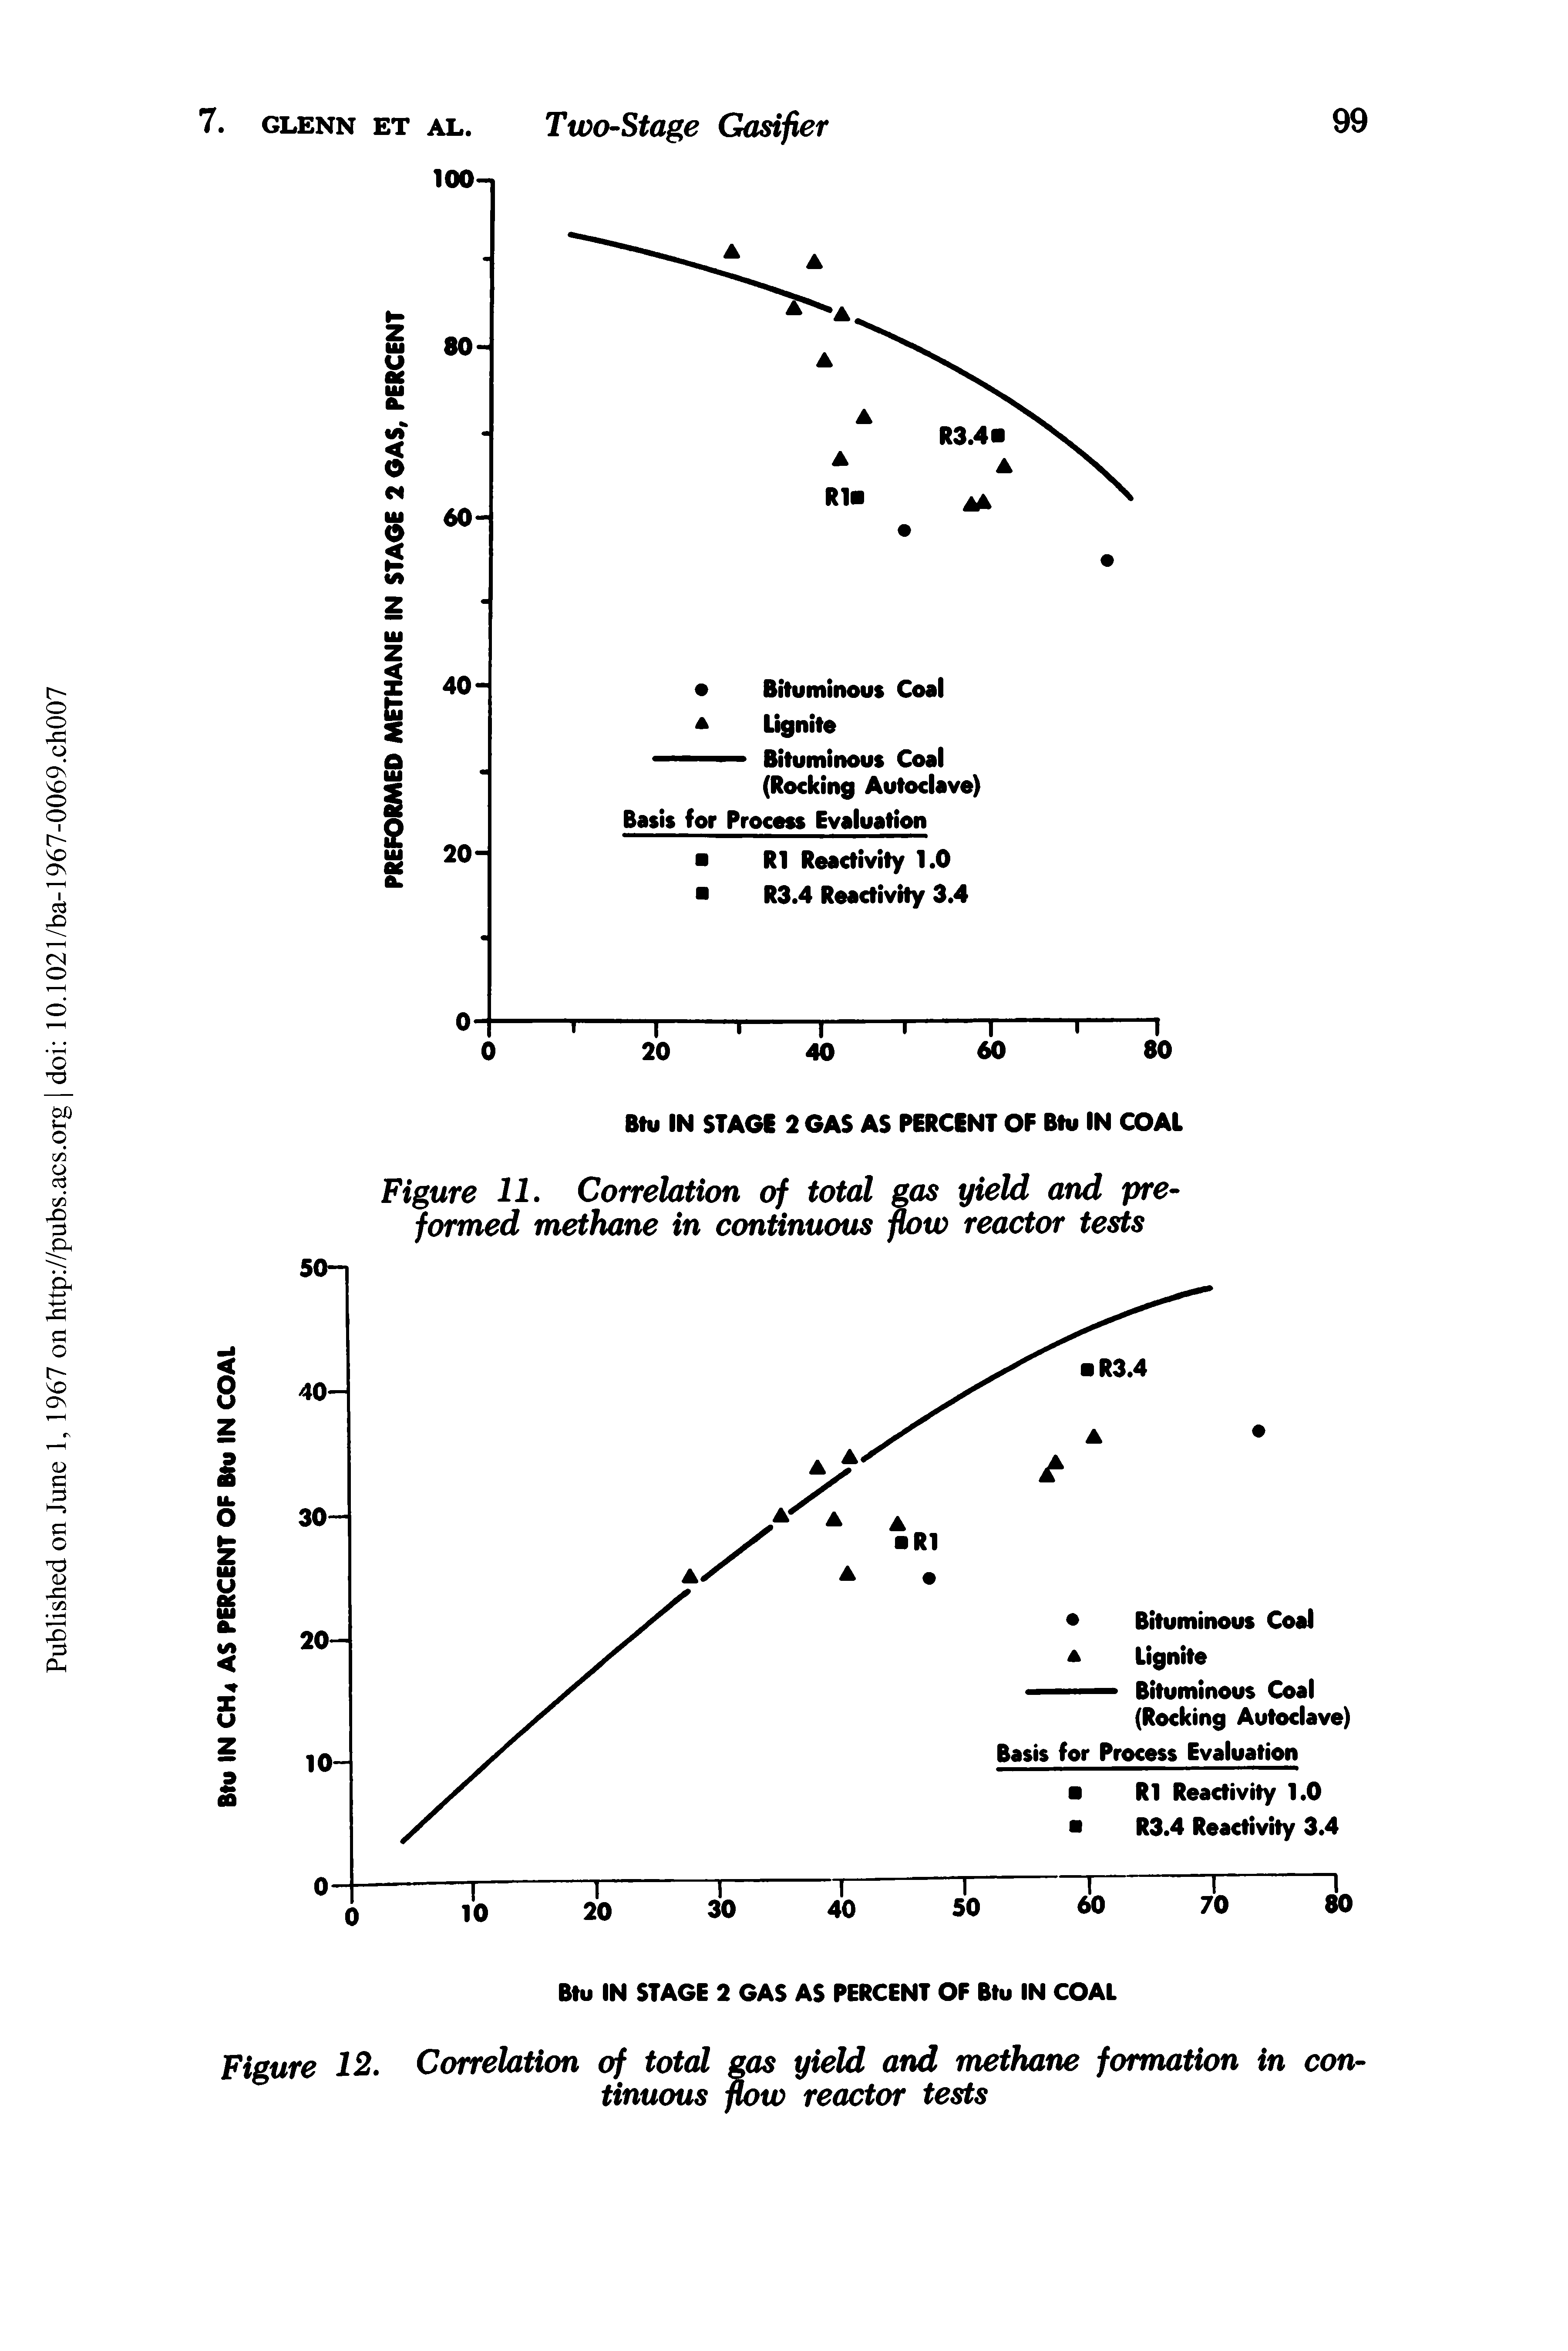 Figure II. Correlation of total gas yield and preformed methane in continuous flow reactor tests...